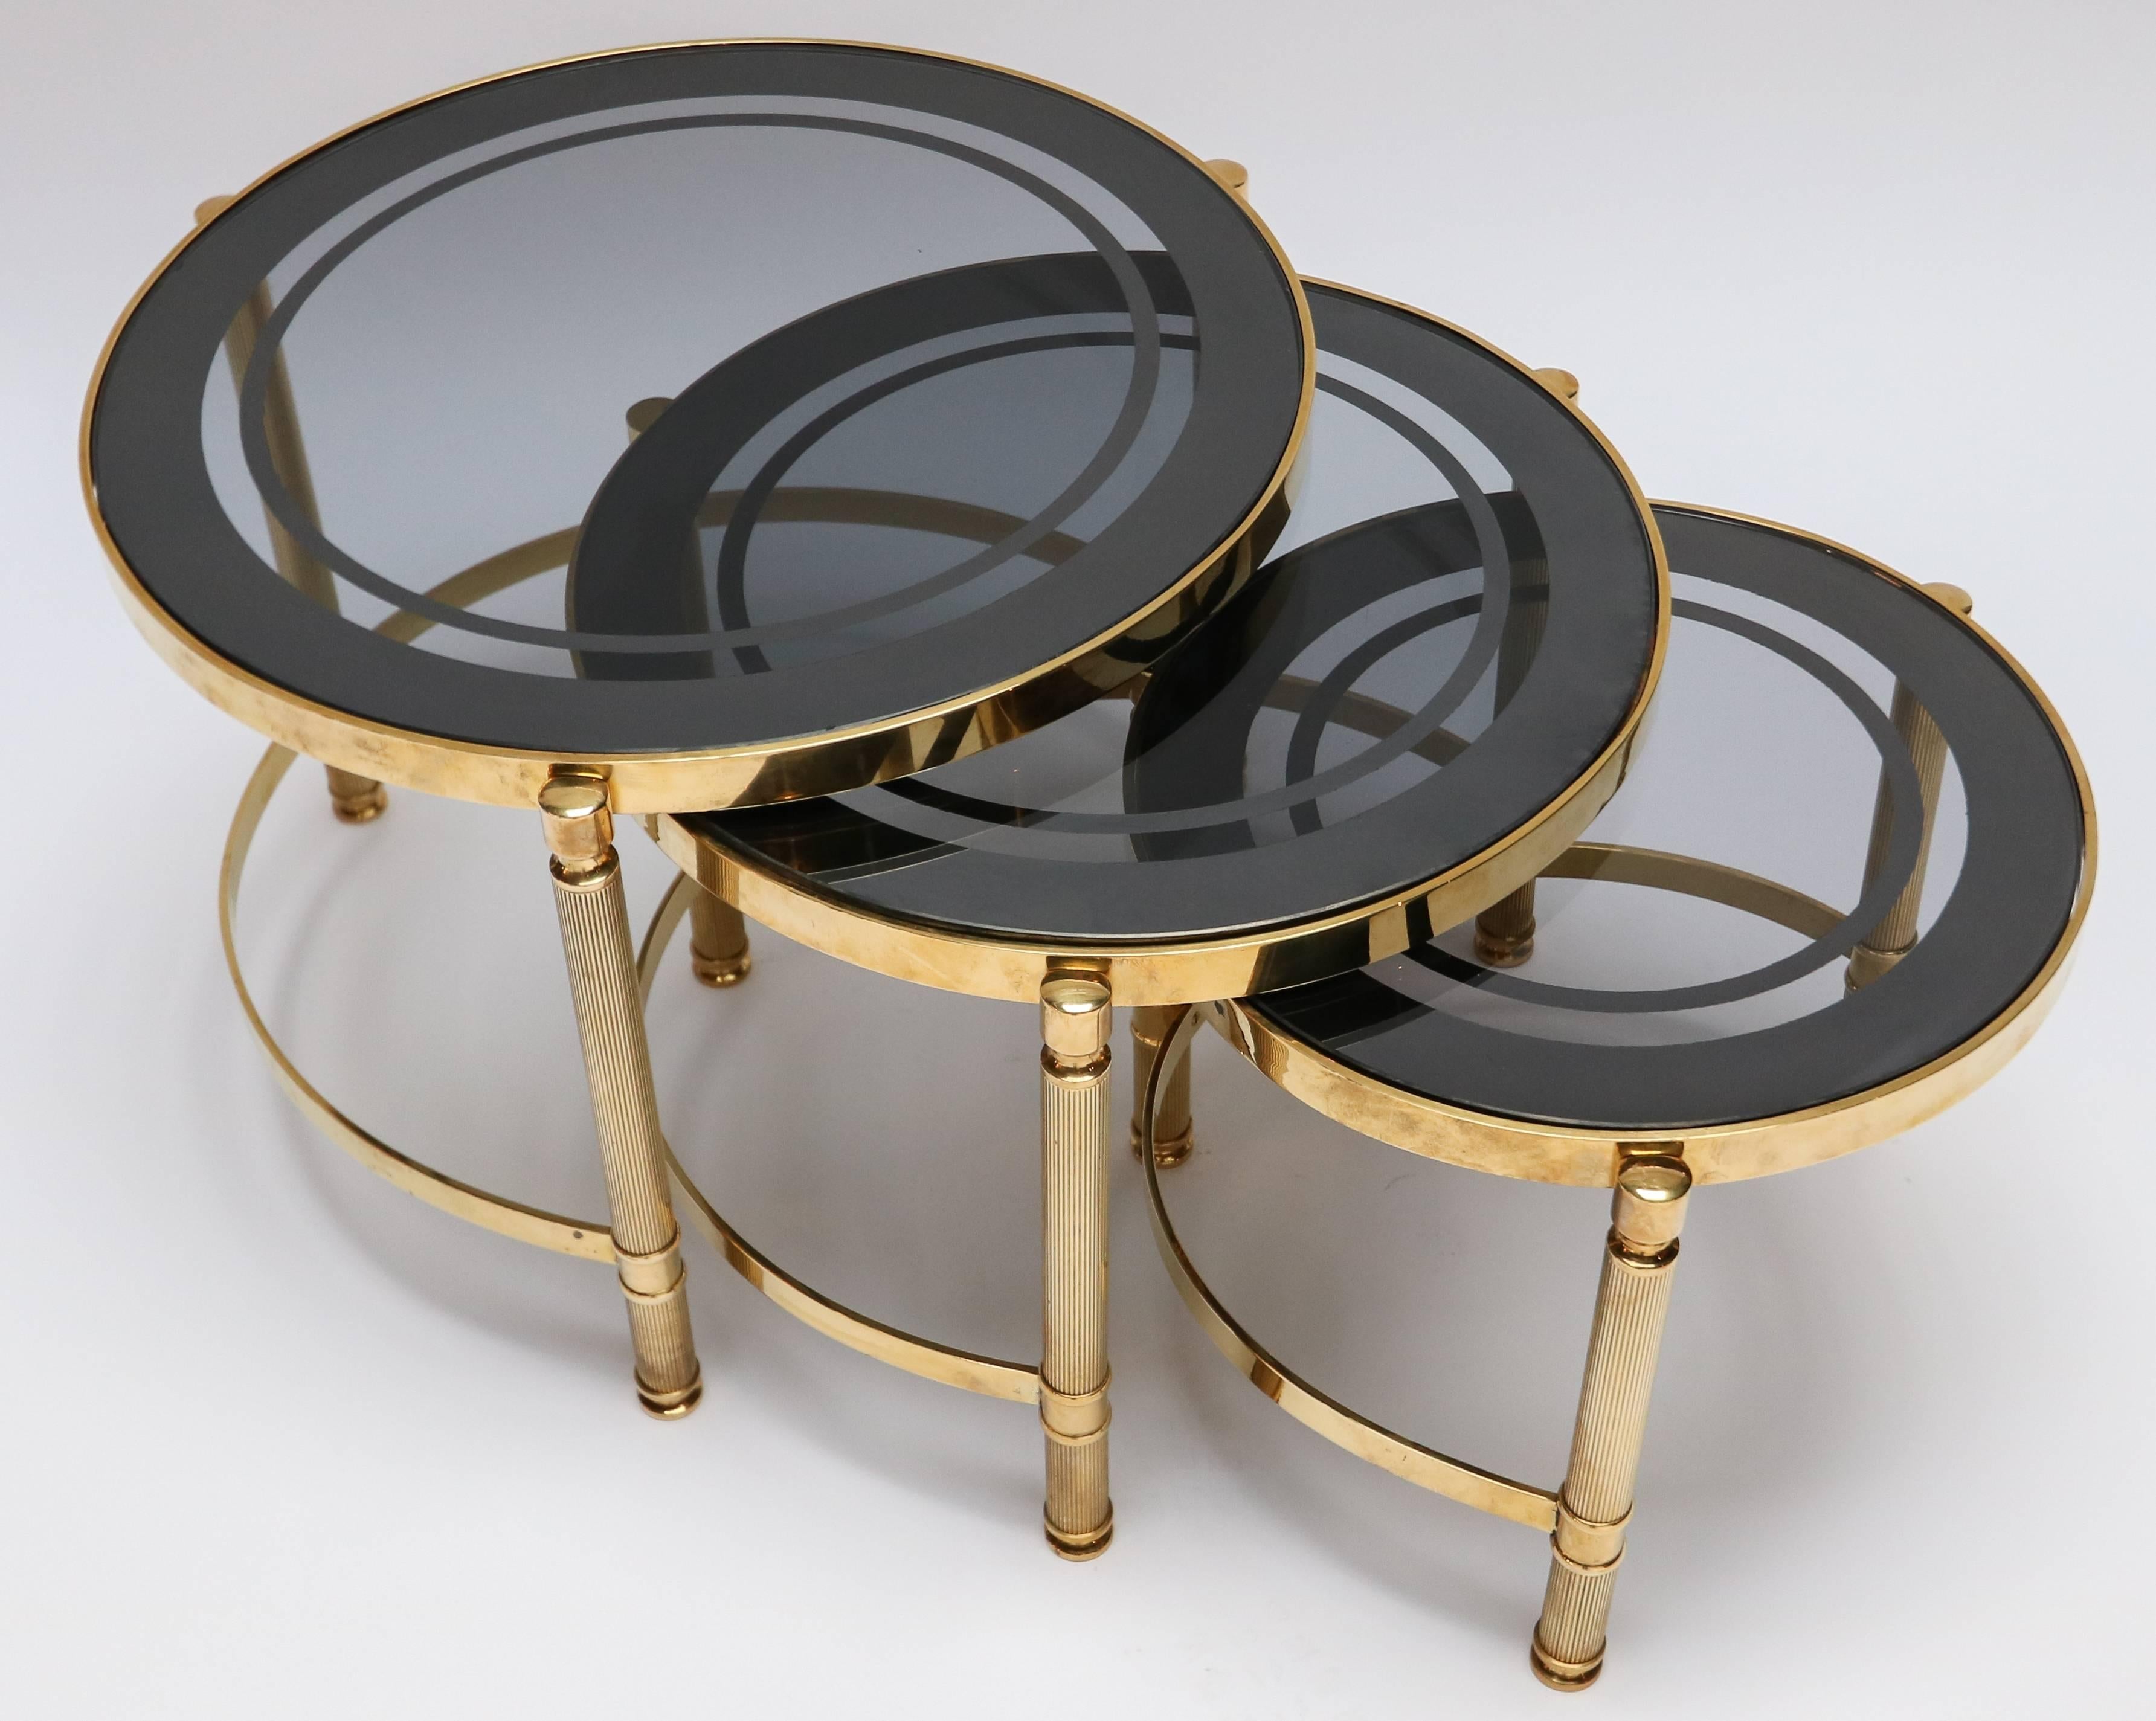 Set of three round brass nesting tables with decorative details and smoked glass tops.

Measures: Small 14.75